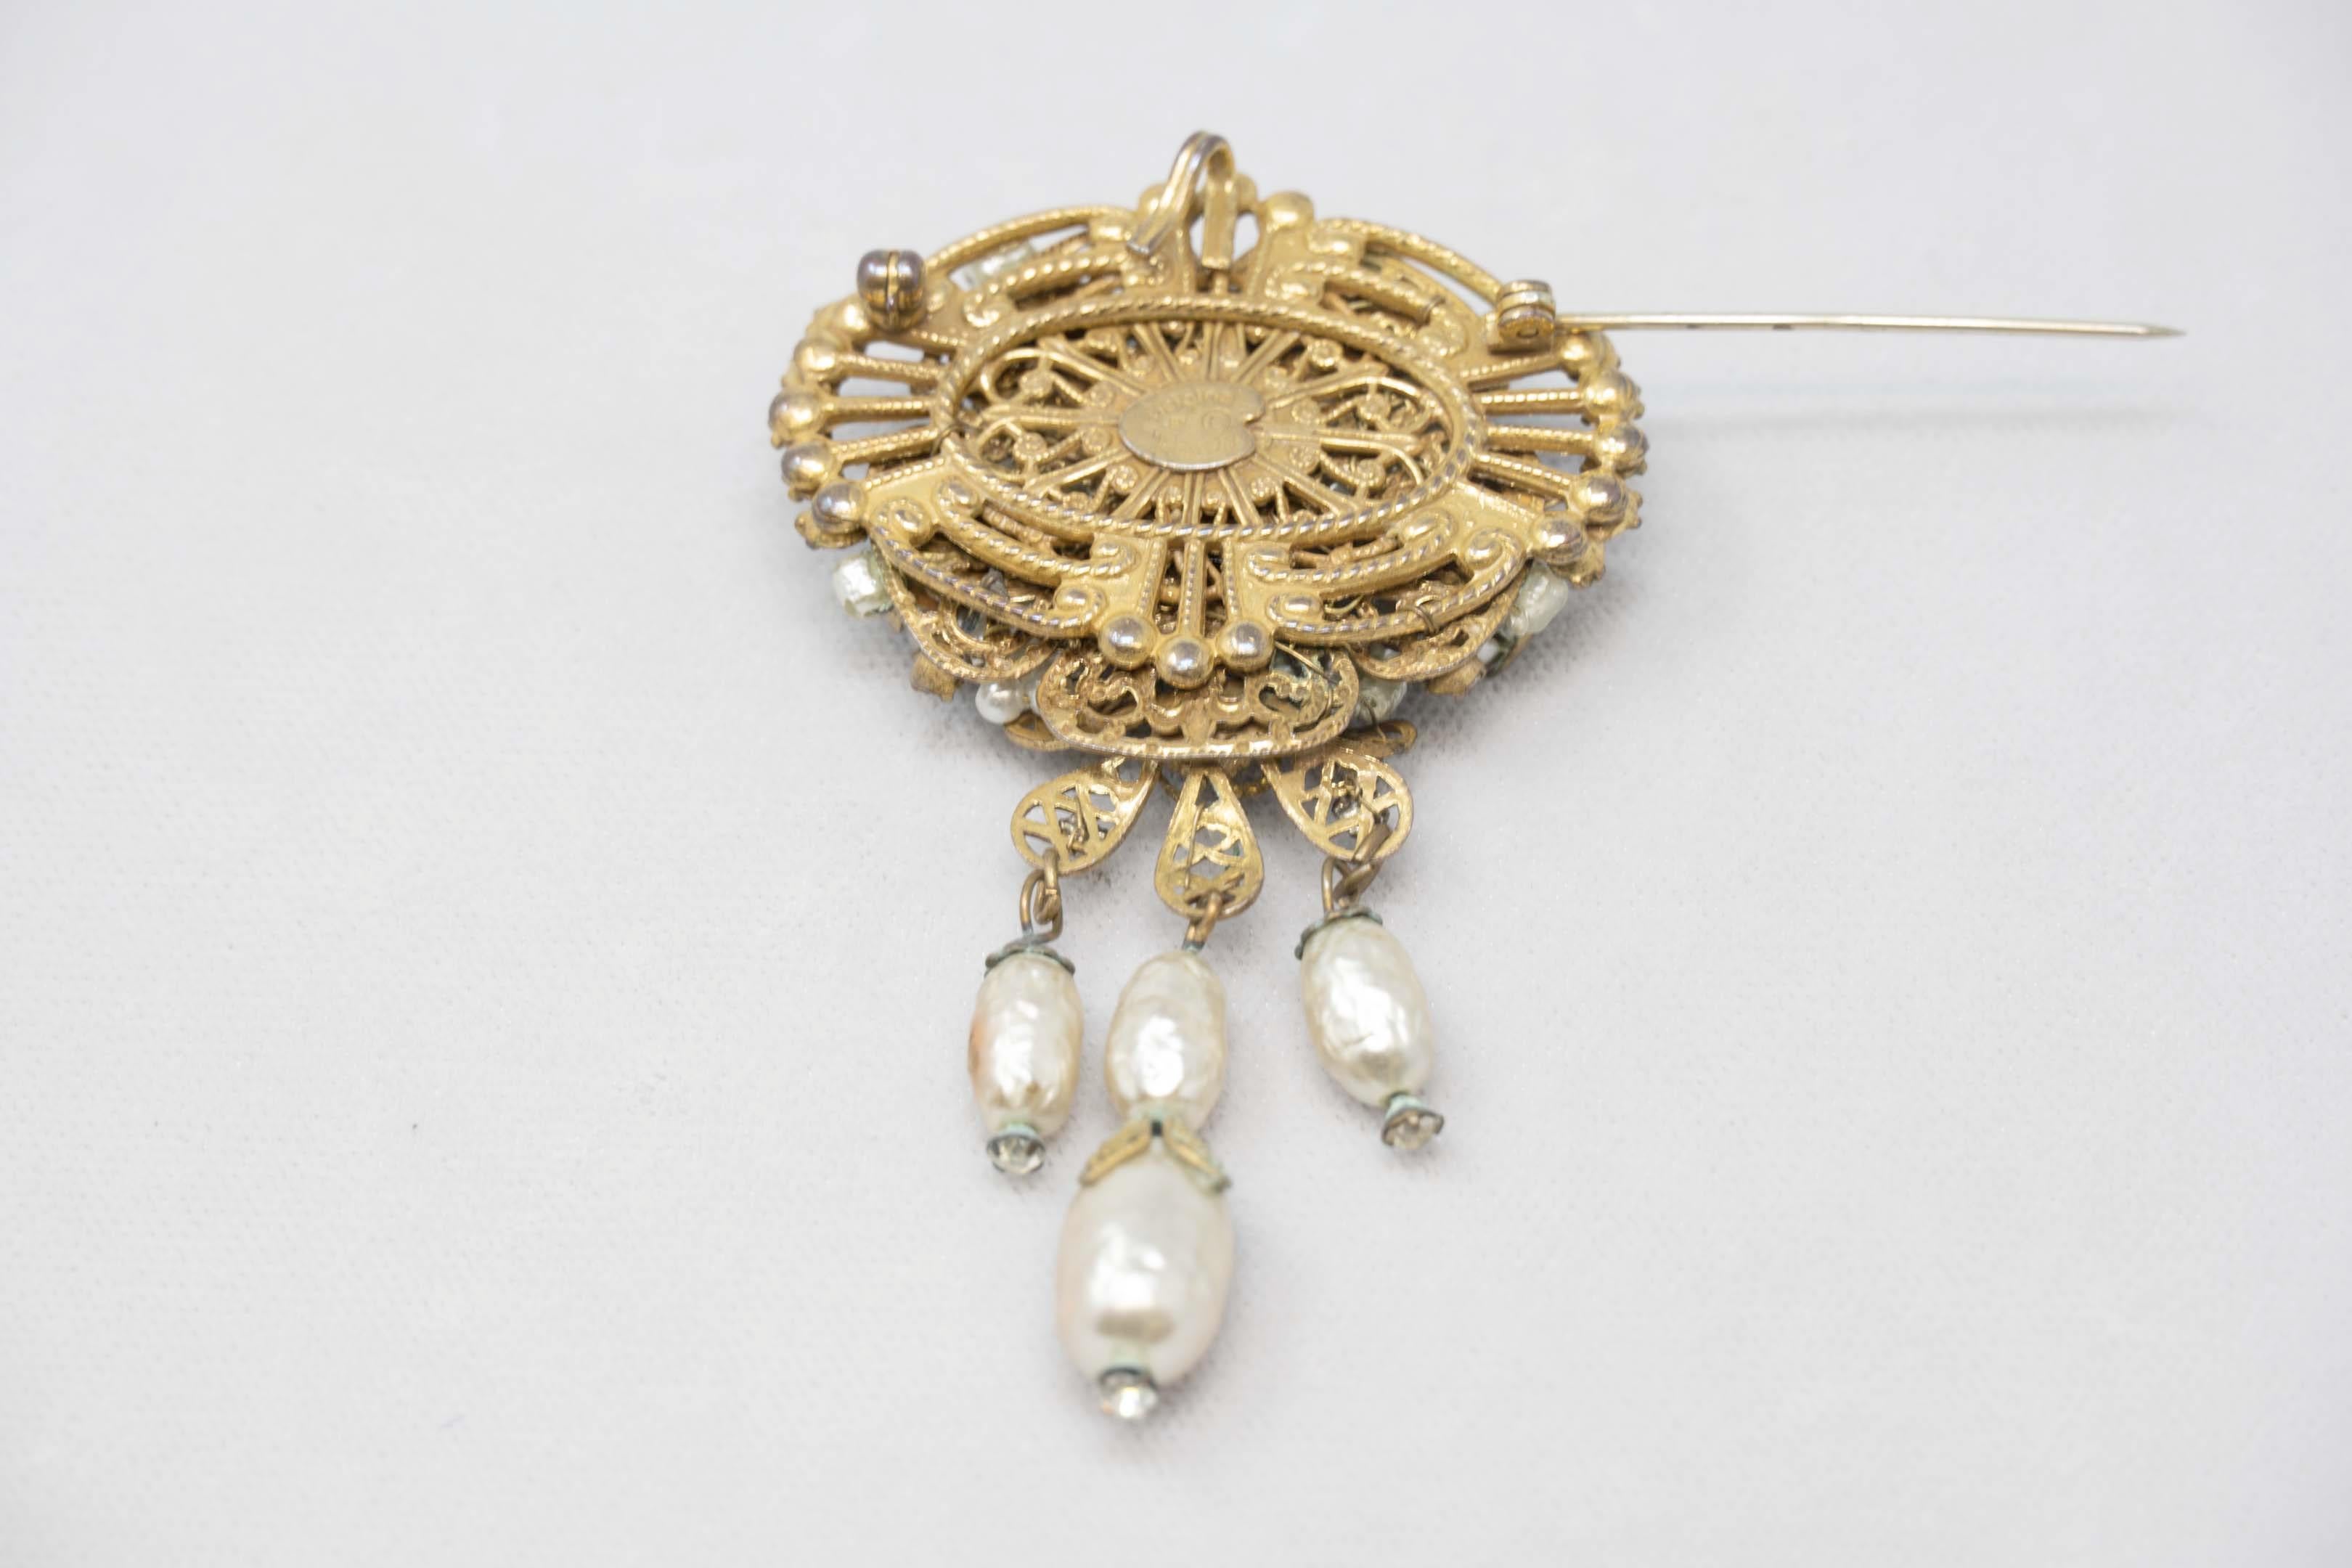 Original by Robert faux pearls and rhinestones brooch. Measures 3 1/4 inches long. Mid 20th century 1960. Wear consistent with age, crystal pearls.
